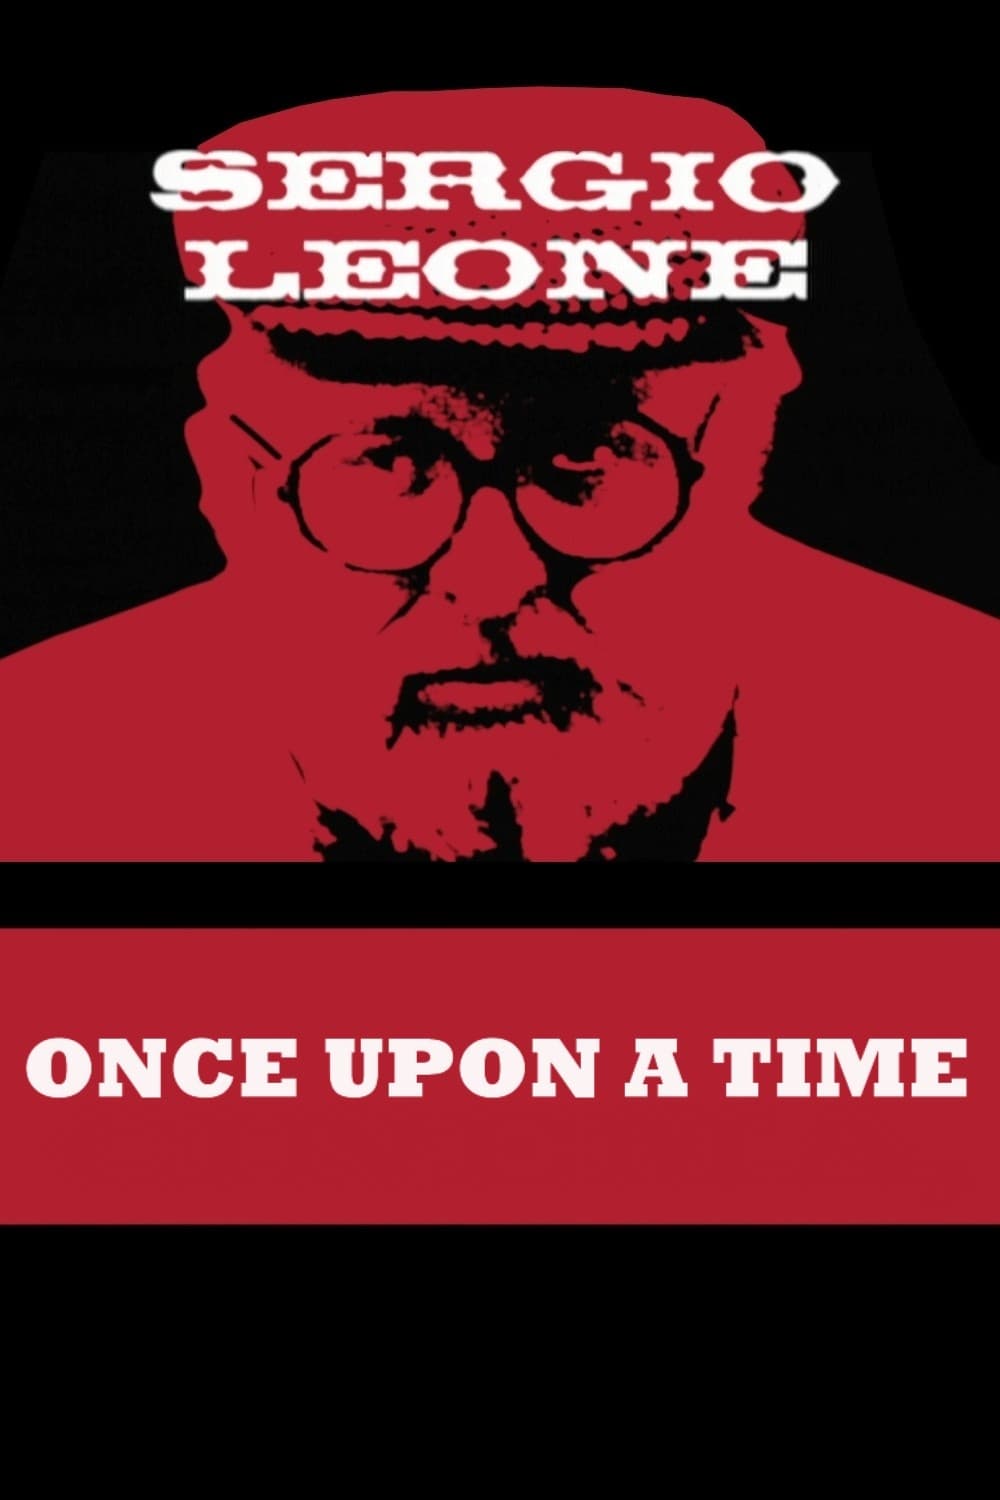 Once Upon a Time: Sergio Leone (2001)